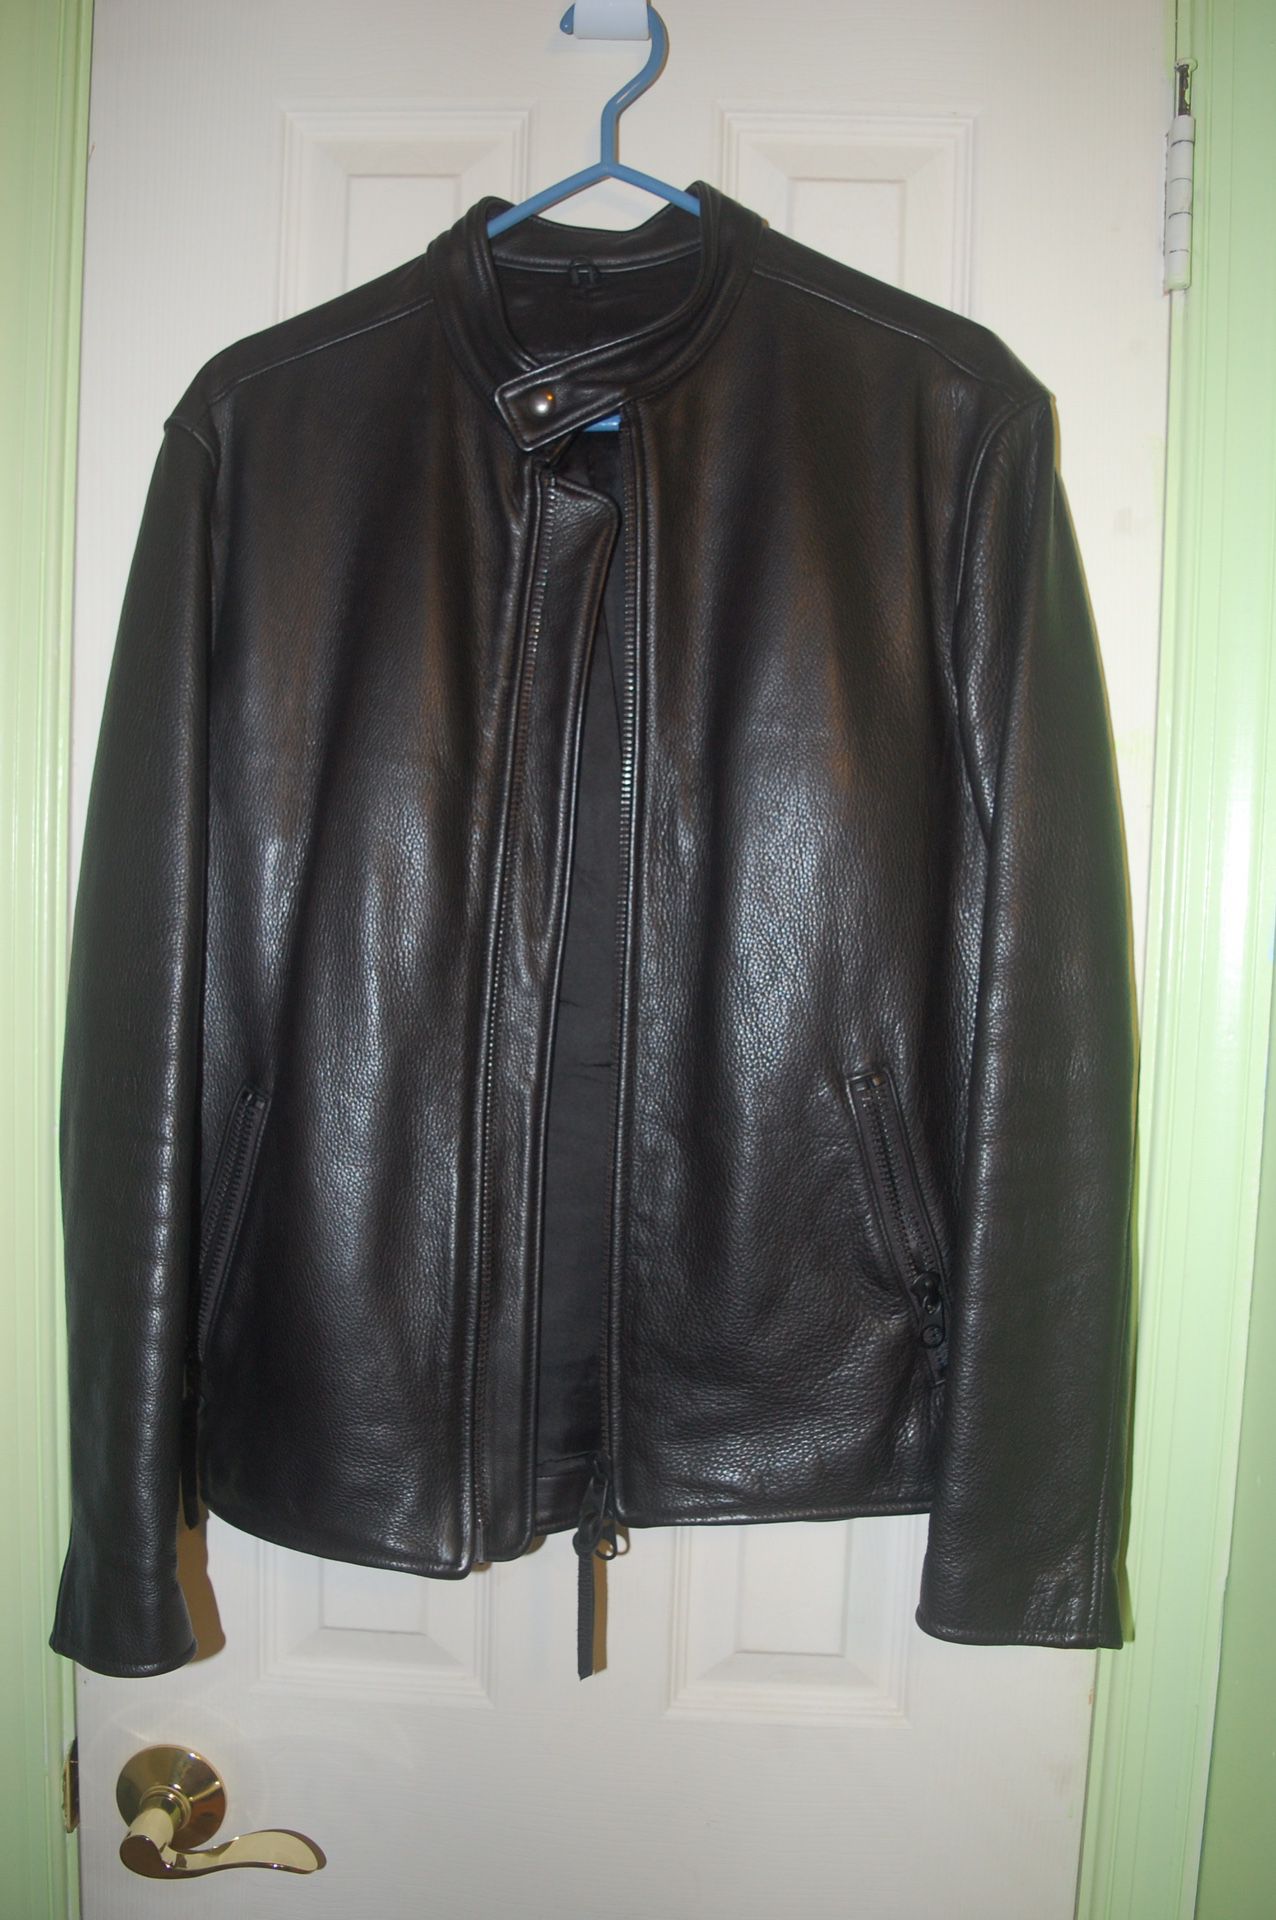 Roots Keith Leather Jacket - Black - M - $425